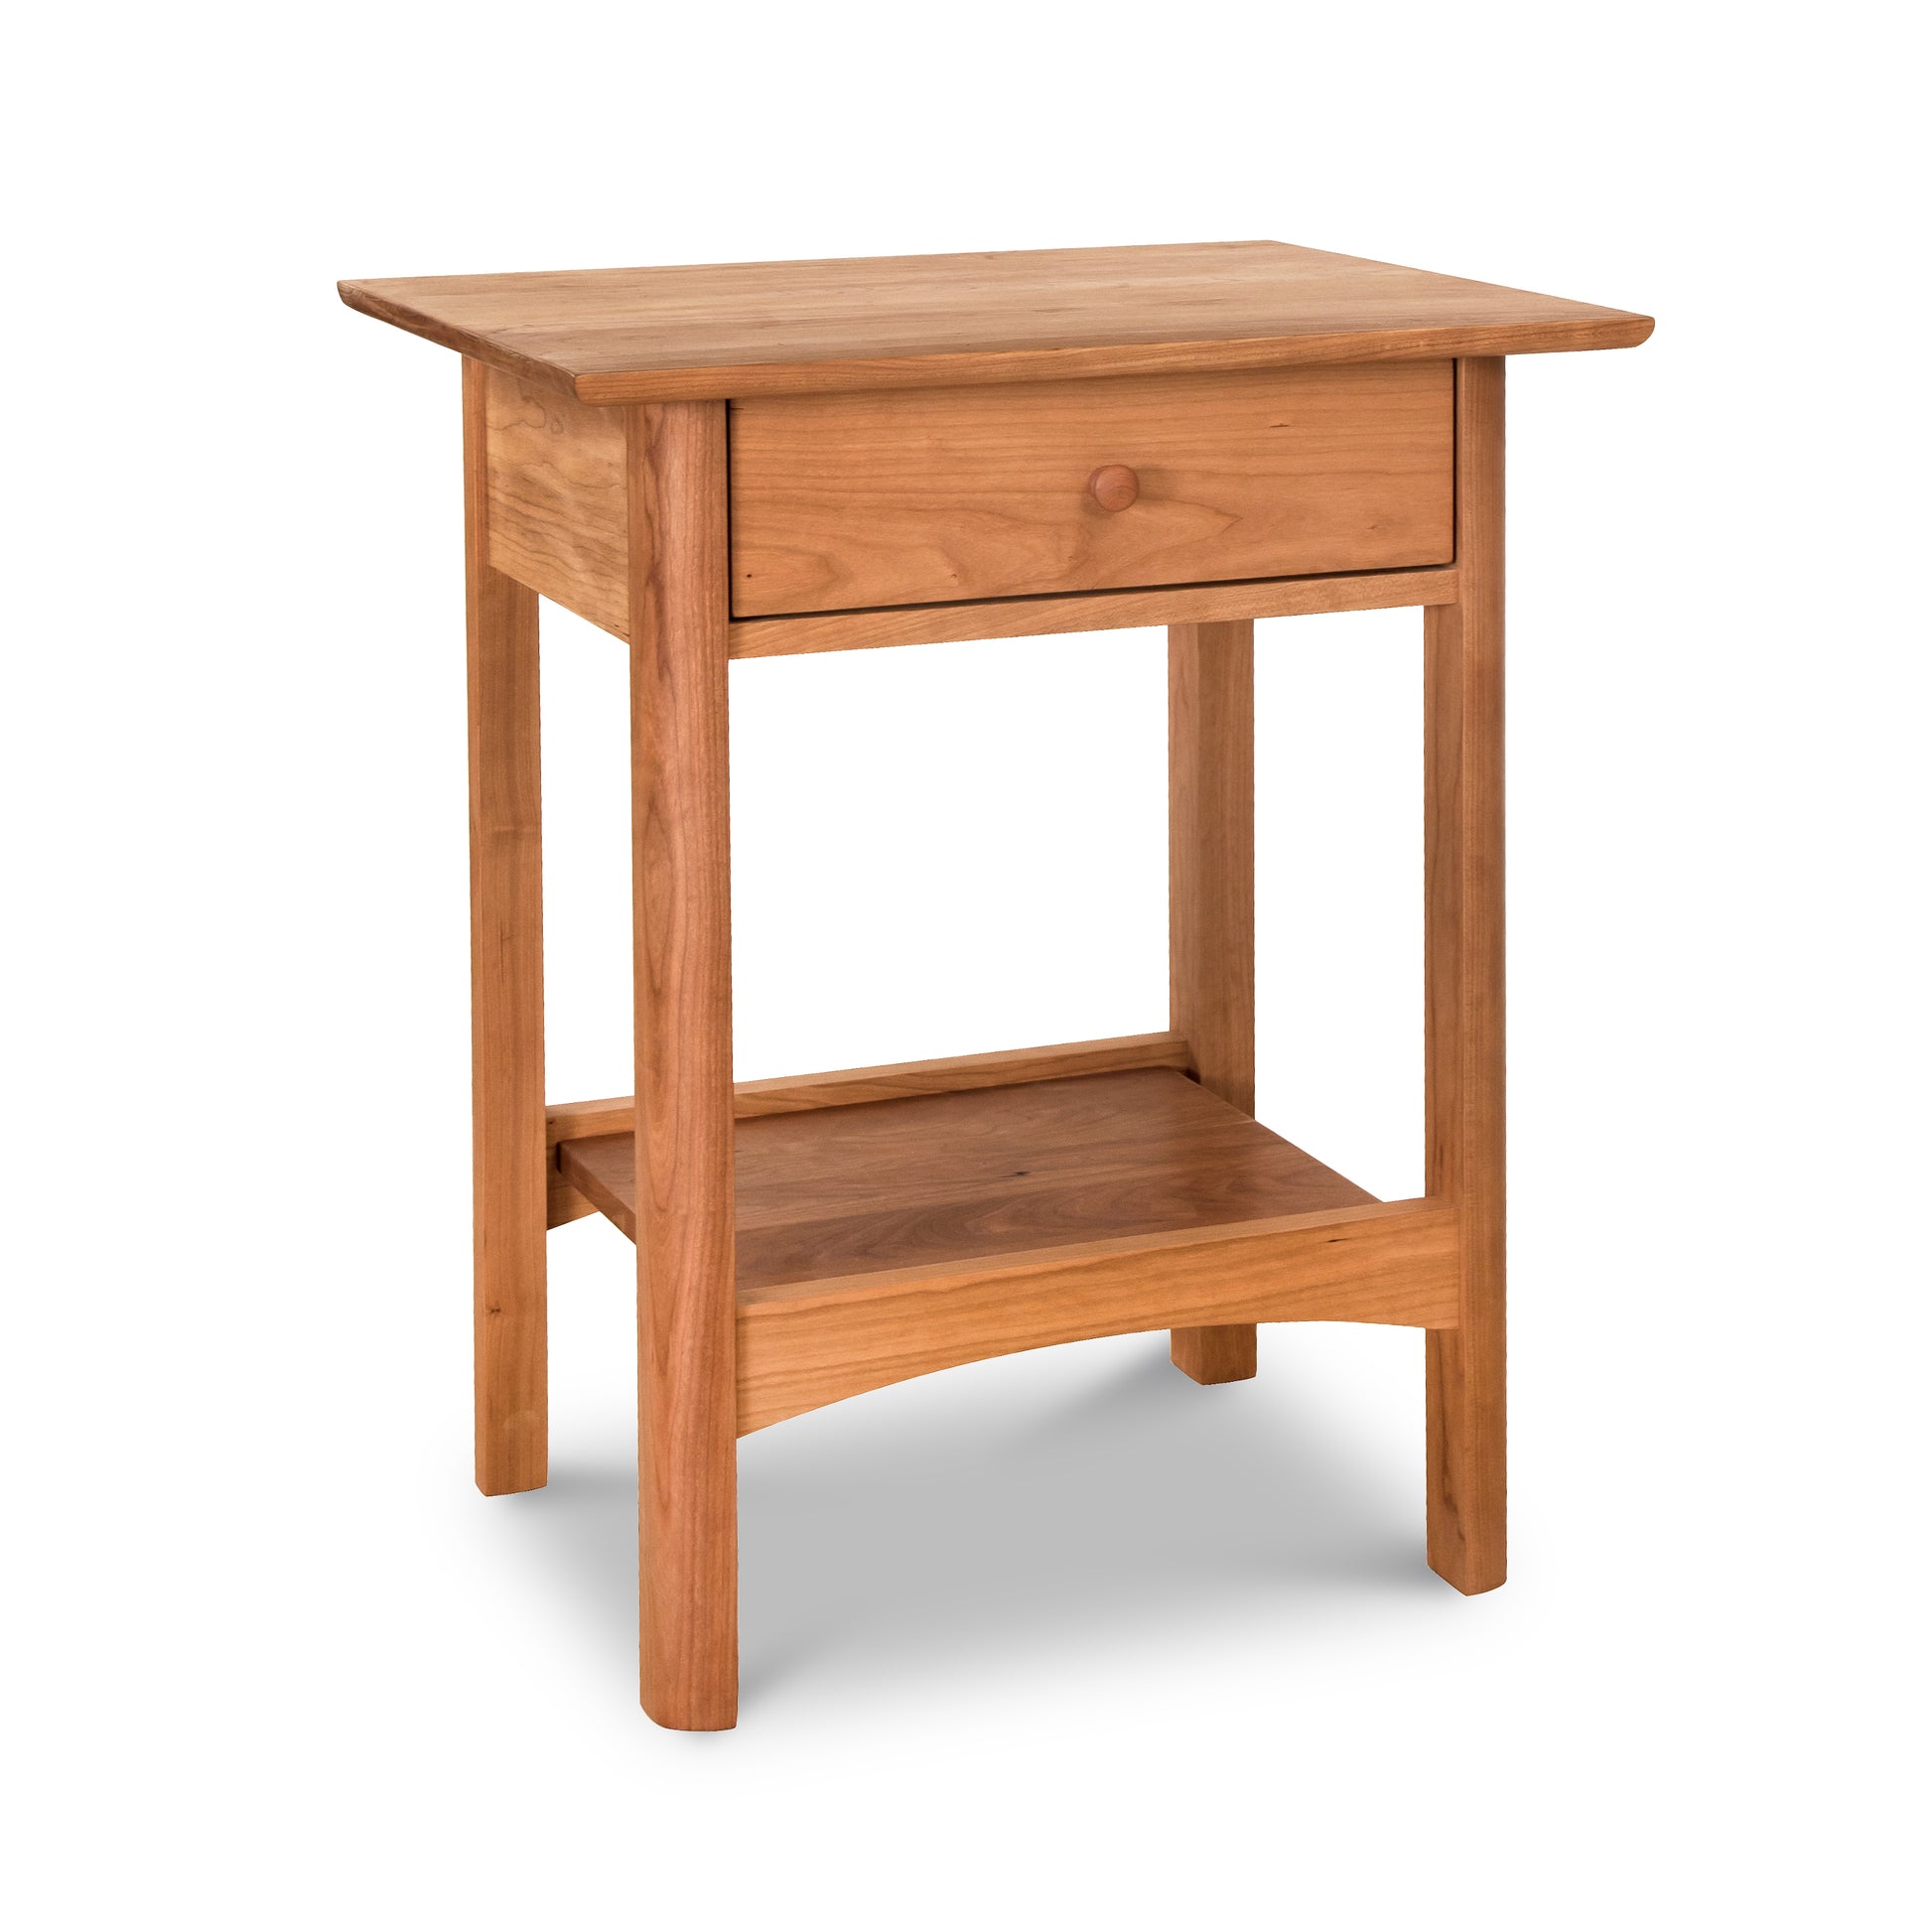 Eco-friendly oil finish Heartwood Shaker 1-Drawer Open Shelf Nightstand, crafted by Vermont Furniture Designs, isolated on a white background.